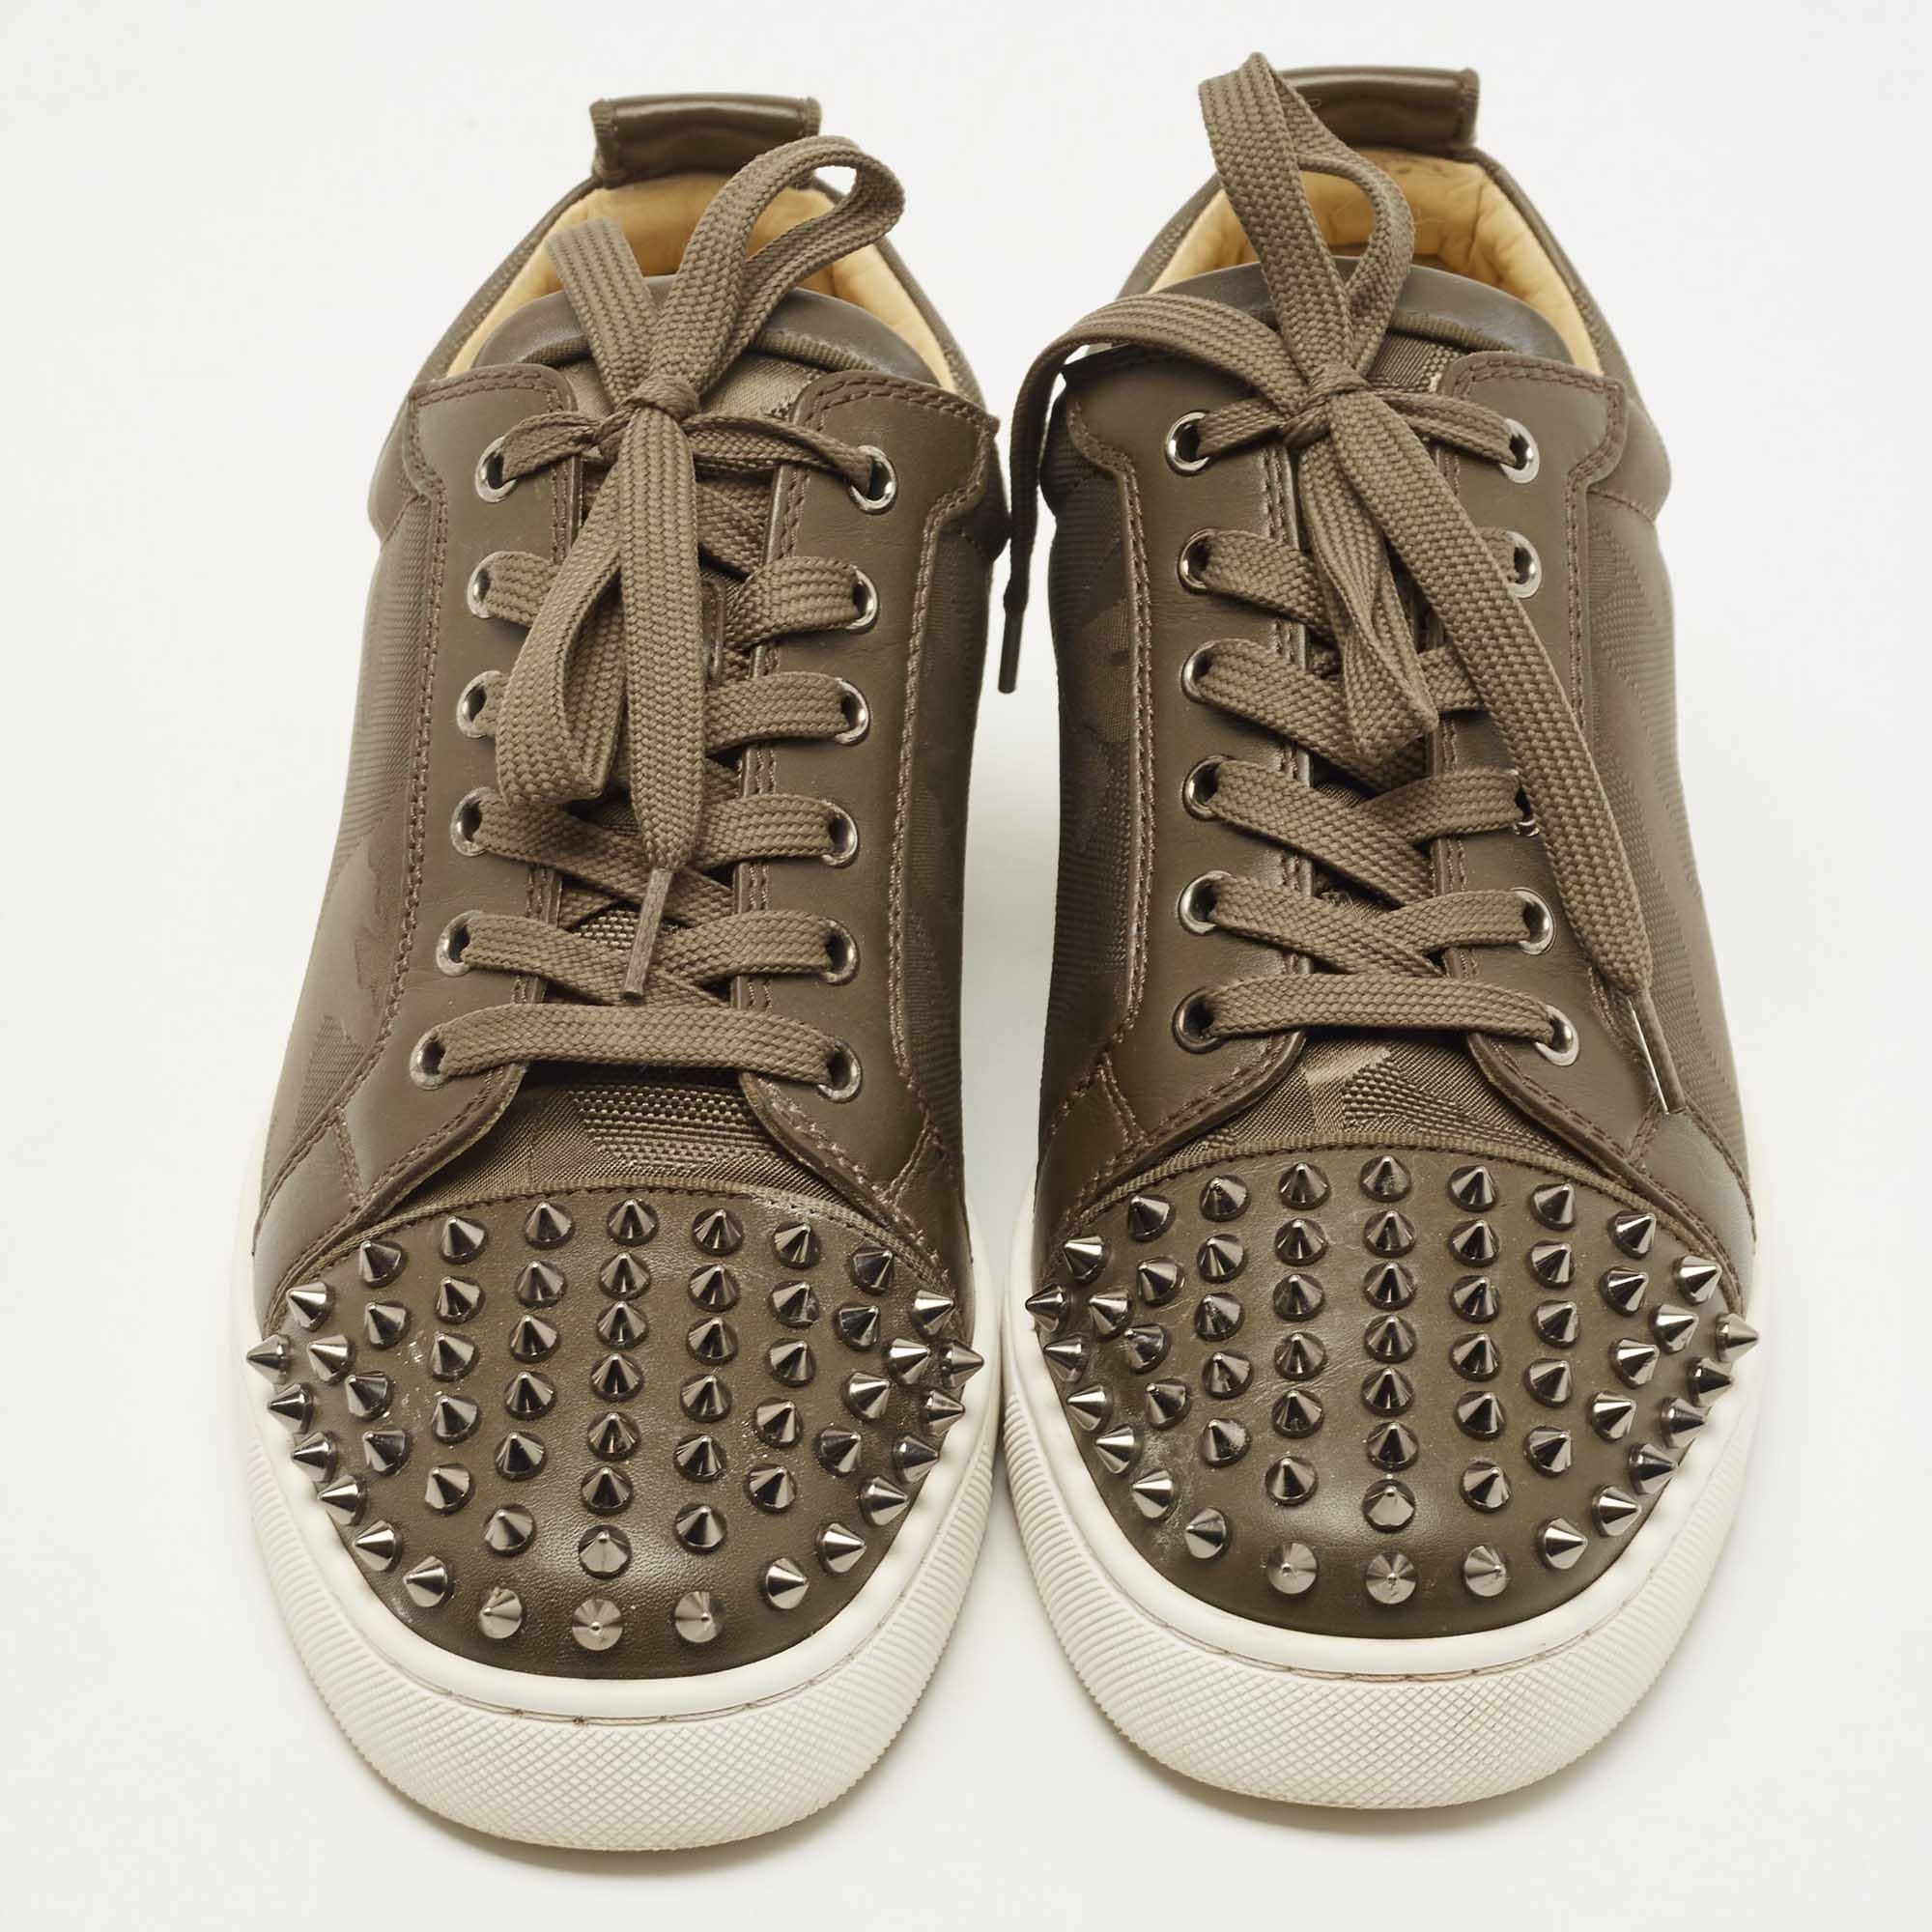 Add a statement appeal to your outfit with these Christian Louboutin sneakers. Made from premium materials, they feature lace-up vamps, stud details, and relaxing footbeds. The rubber sole of this pair aims to provide you with everyday ease.

